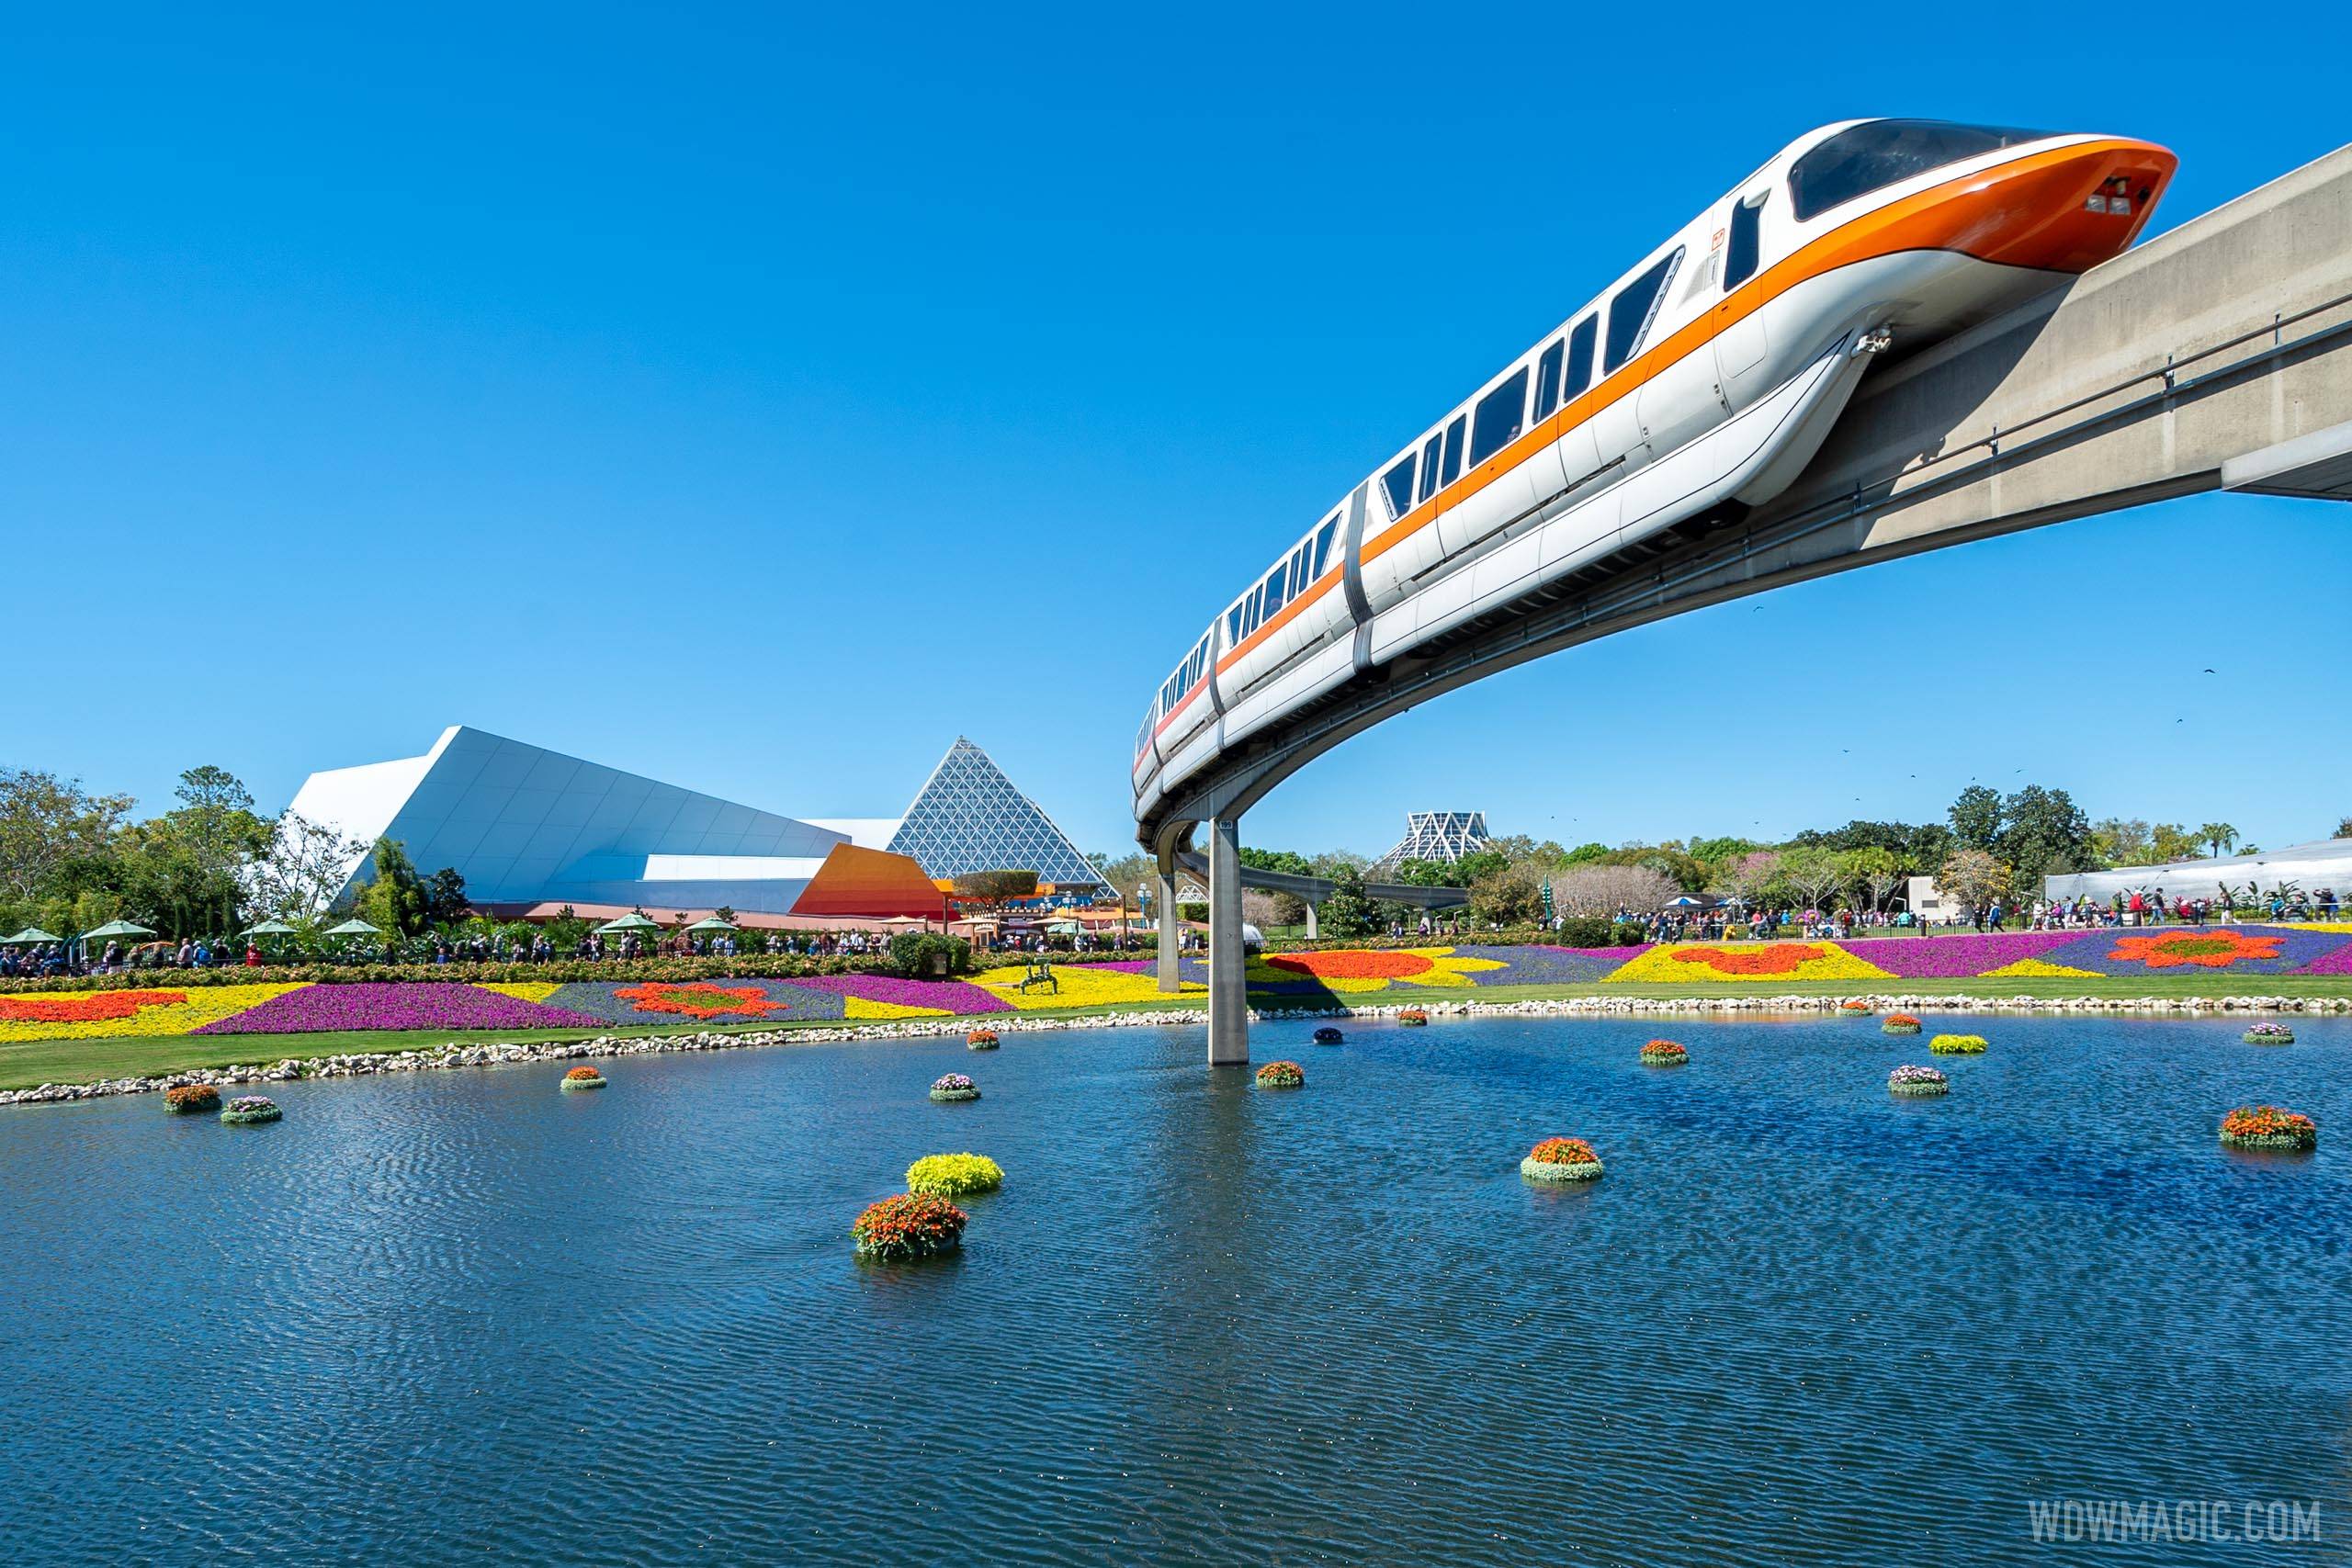 Park hopping begins January 1 2021 but will not see the return of the EPCOT monorail